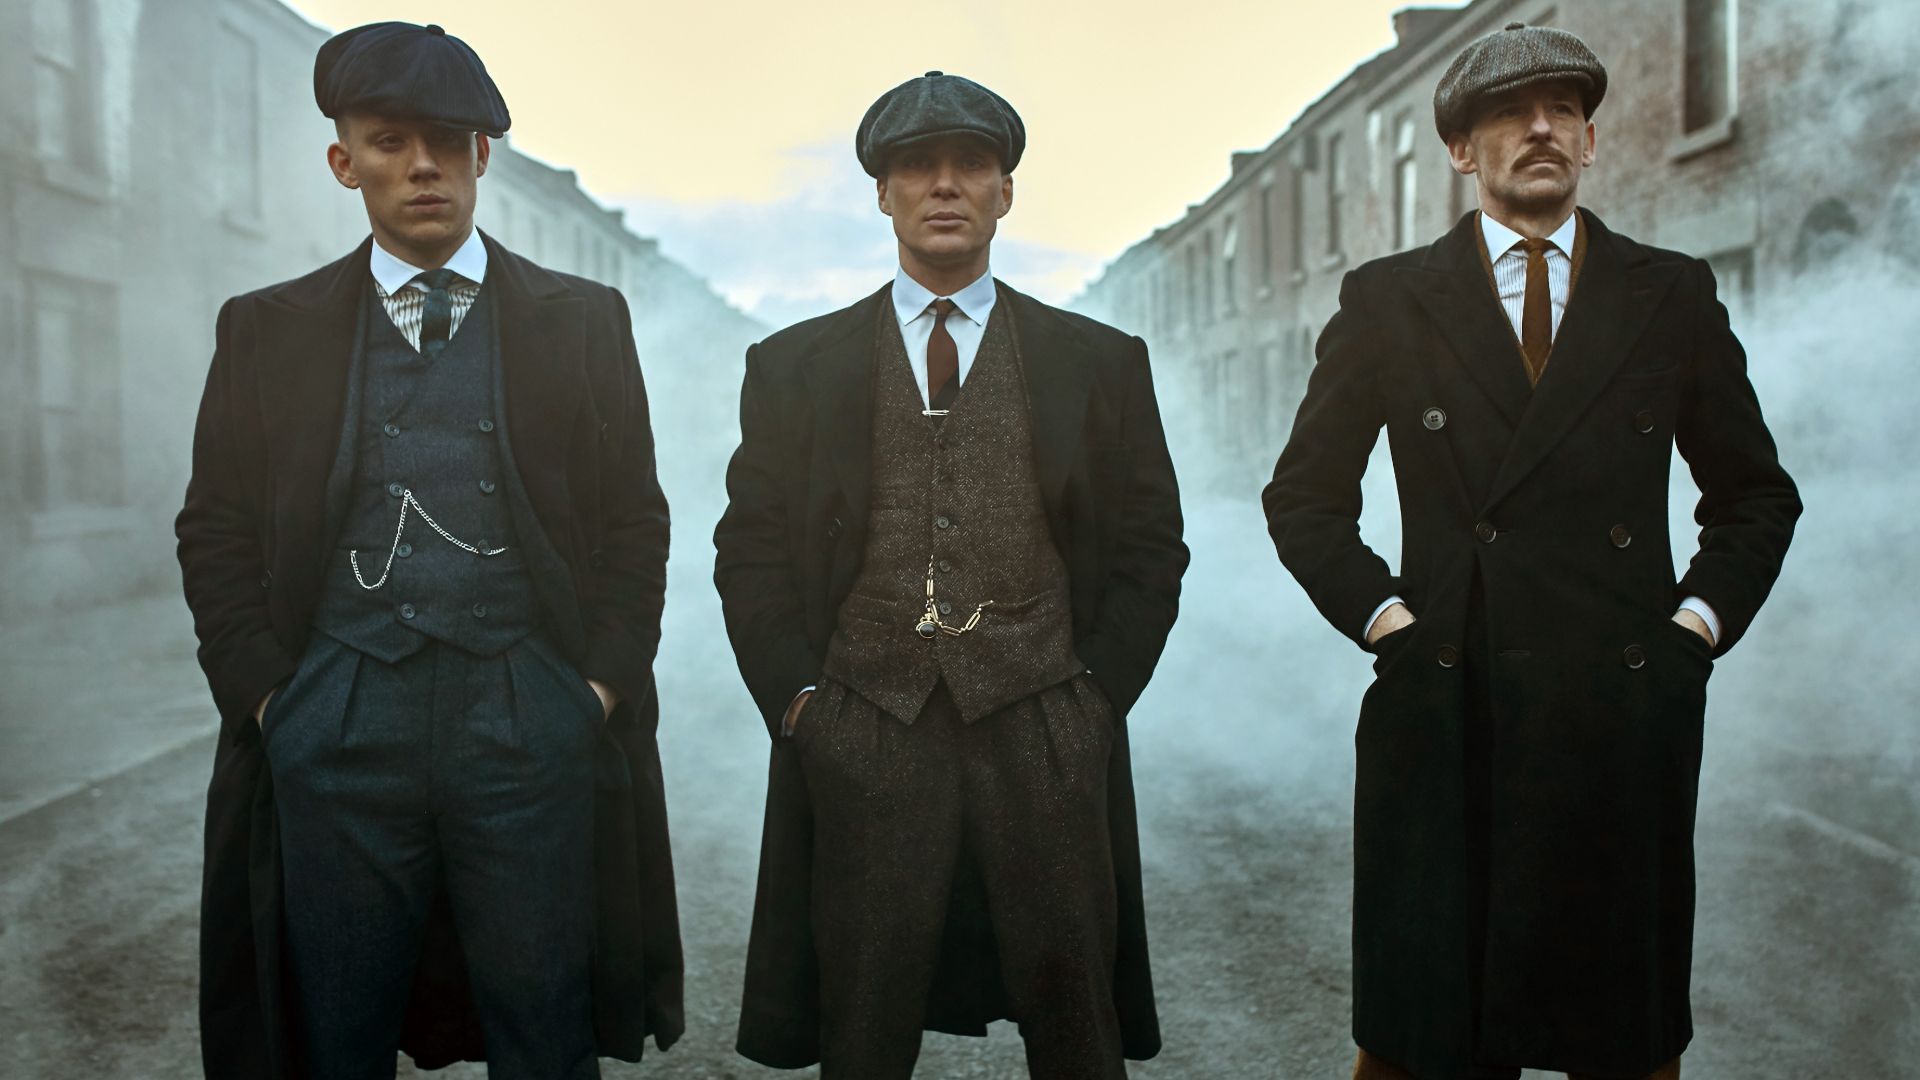 Peaky Blinders - One of the best Netflix shows